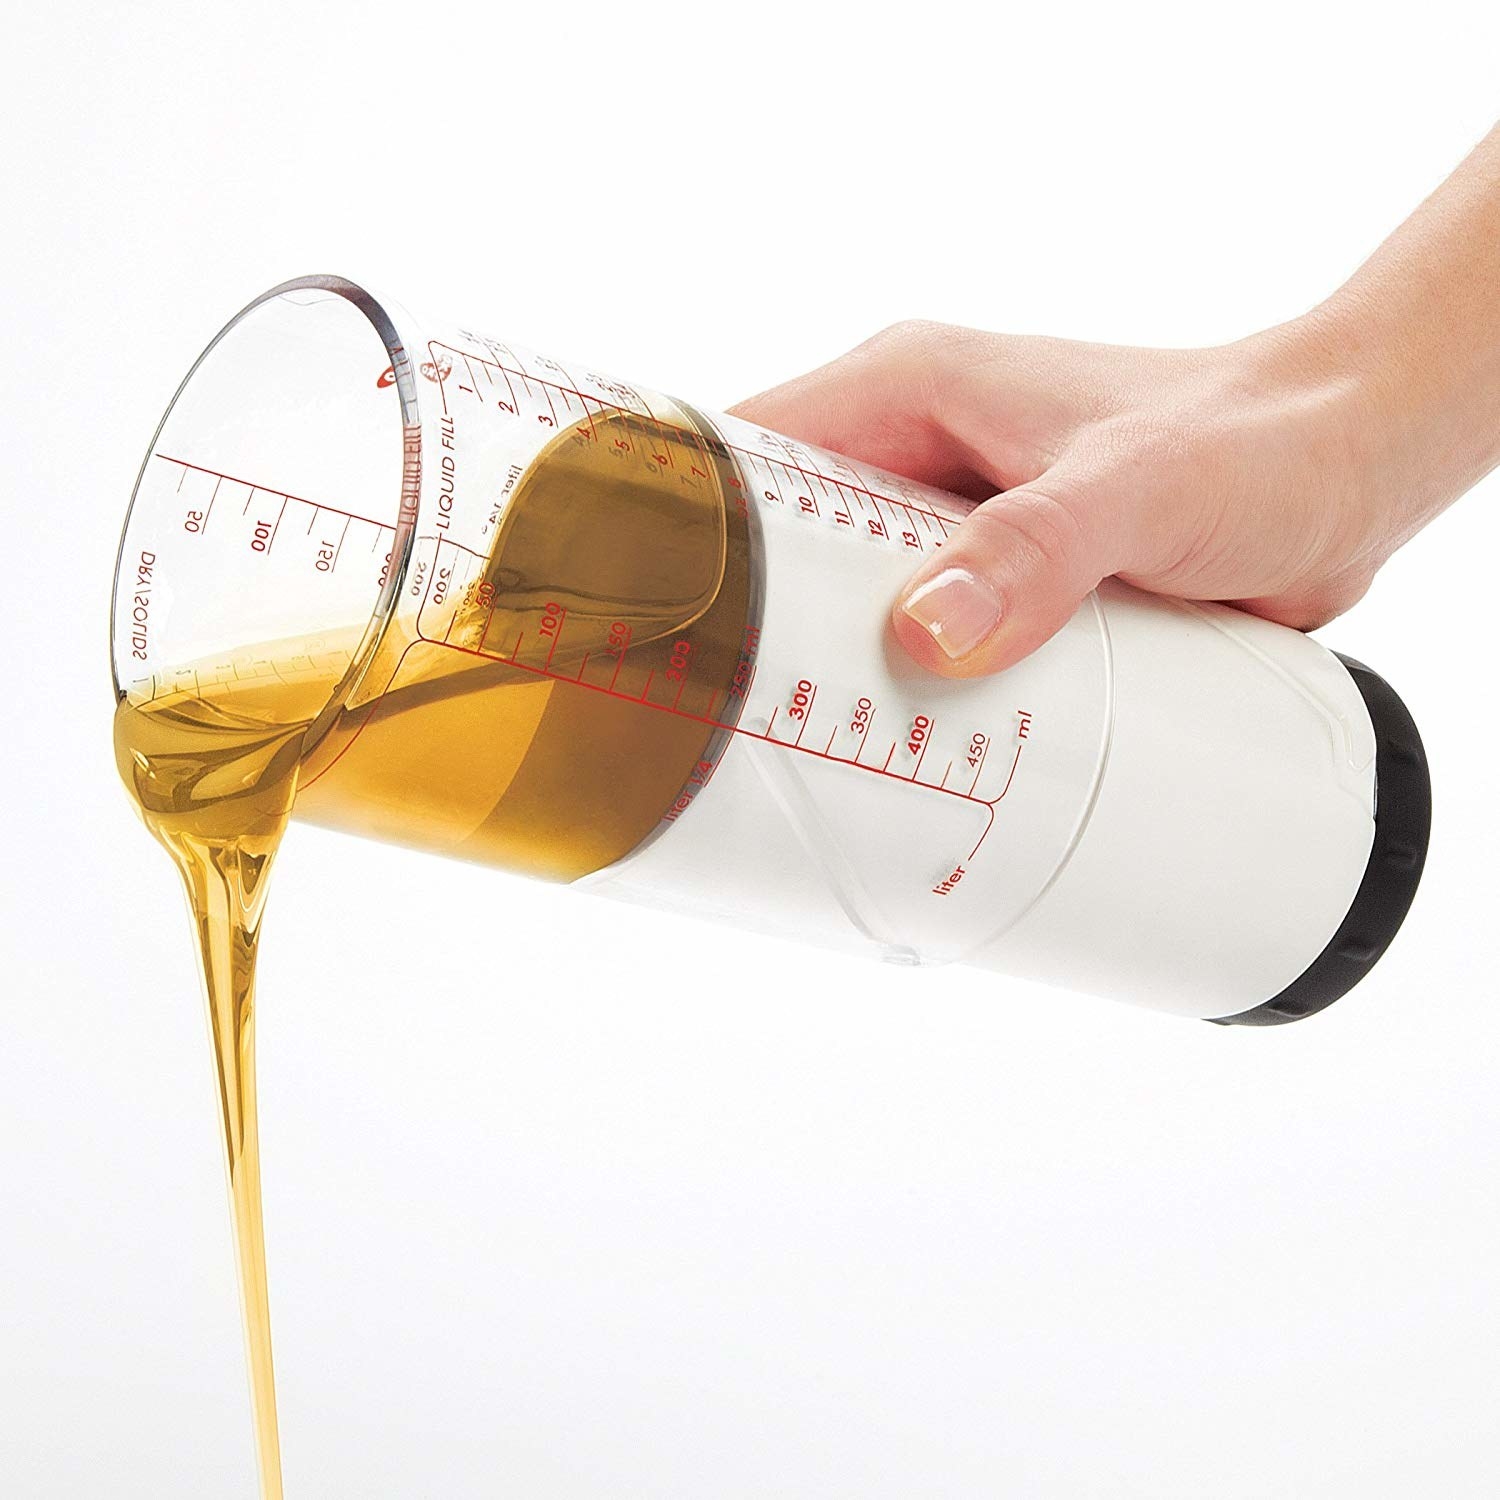 A hand pouring oil out of the cylindrical measuring cup, which features precise measurements etched on the side